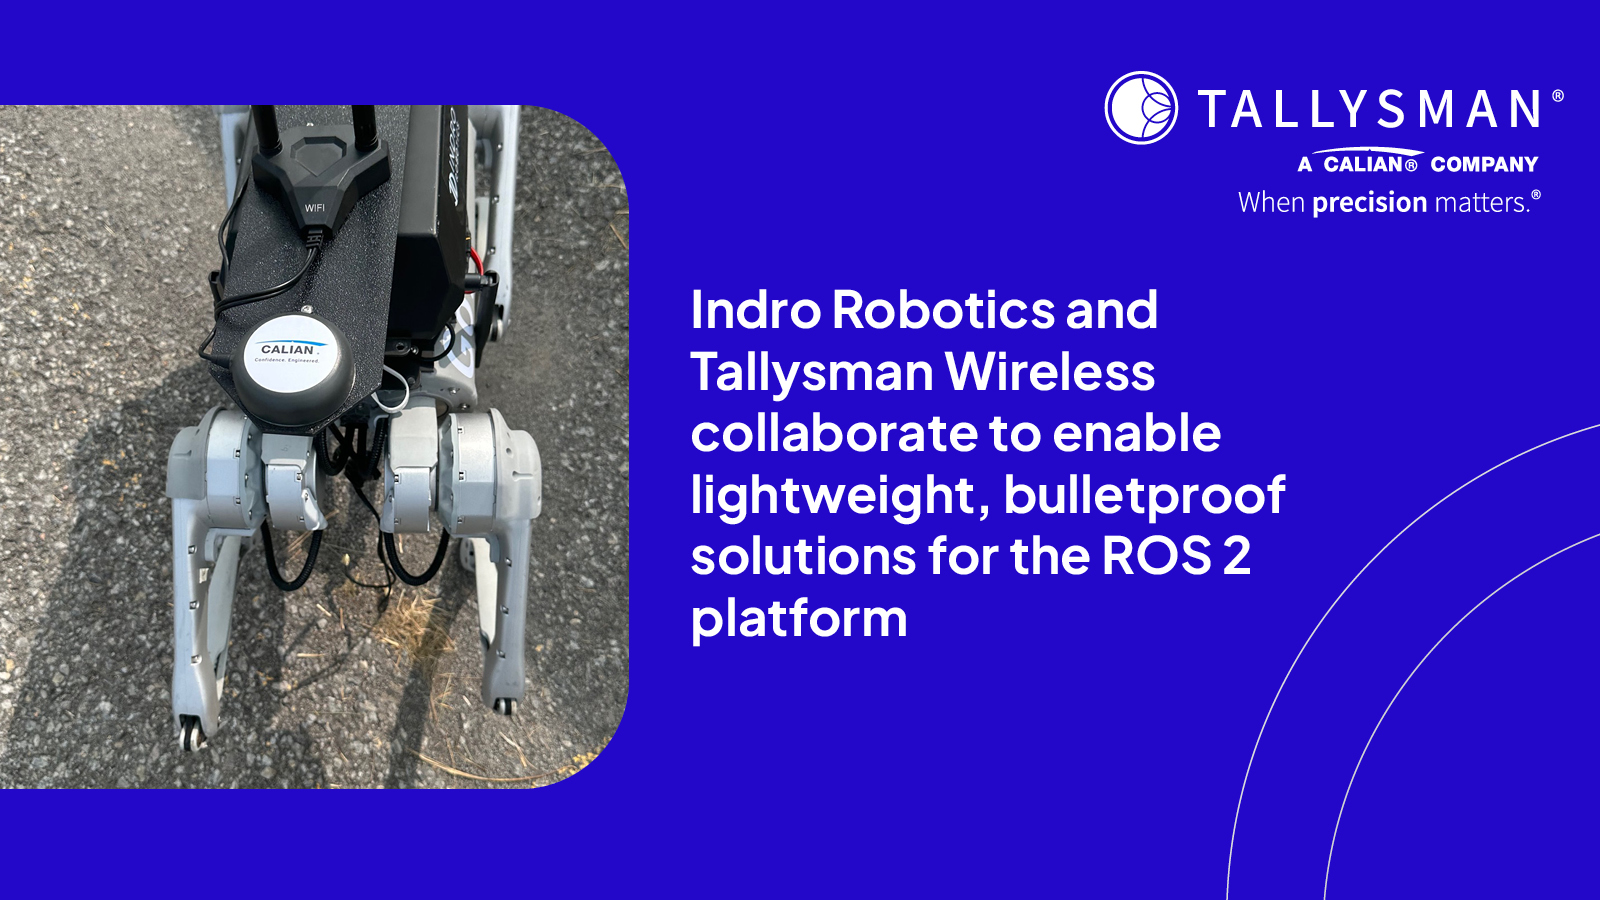 InDro Robotics and Tallysman Wireless, a Calian company, collaborate to enable lightweight, bulletproof solutions for the ROS 2 platform